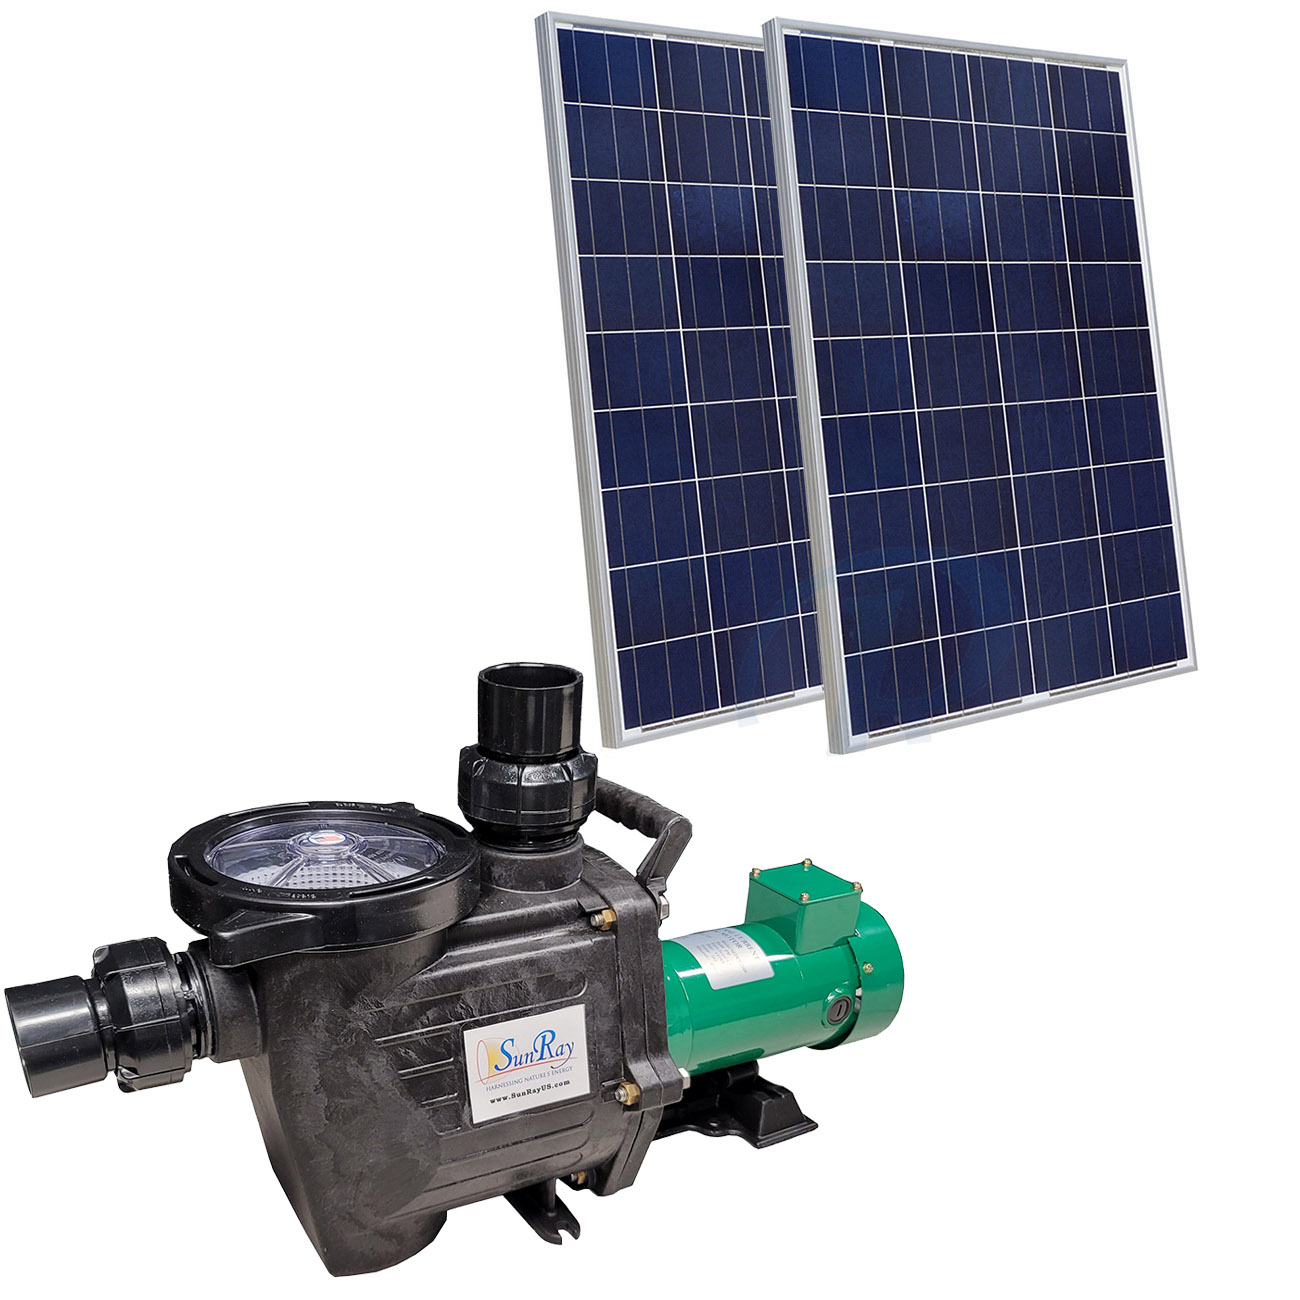 Solar Pool Filter Pump Systems with Controller SunRay without solar panels pond 